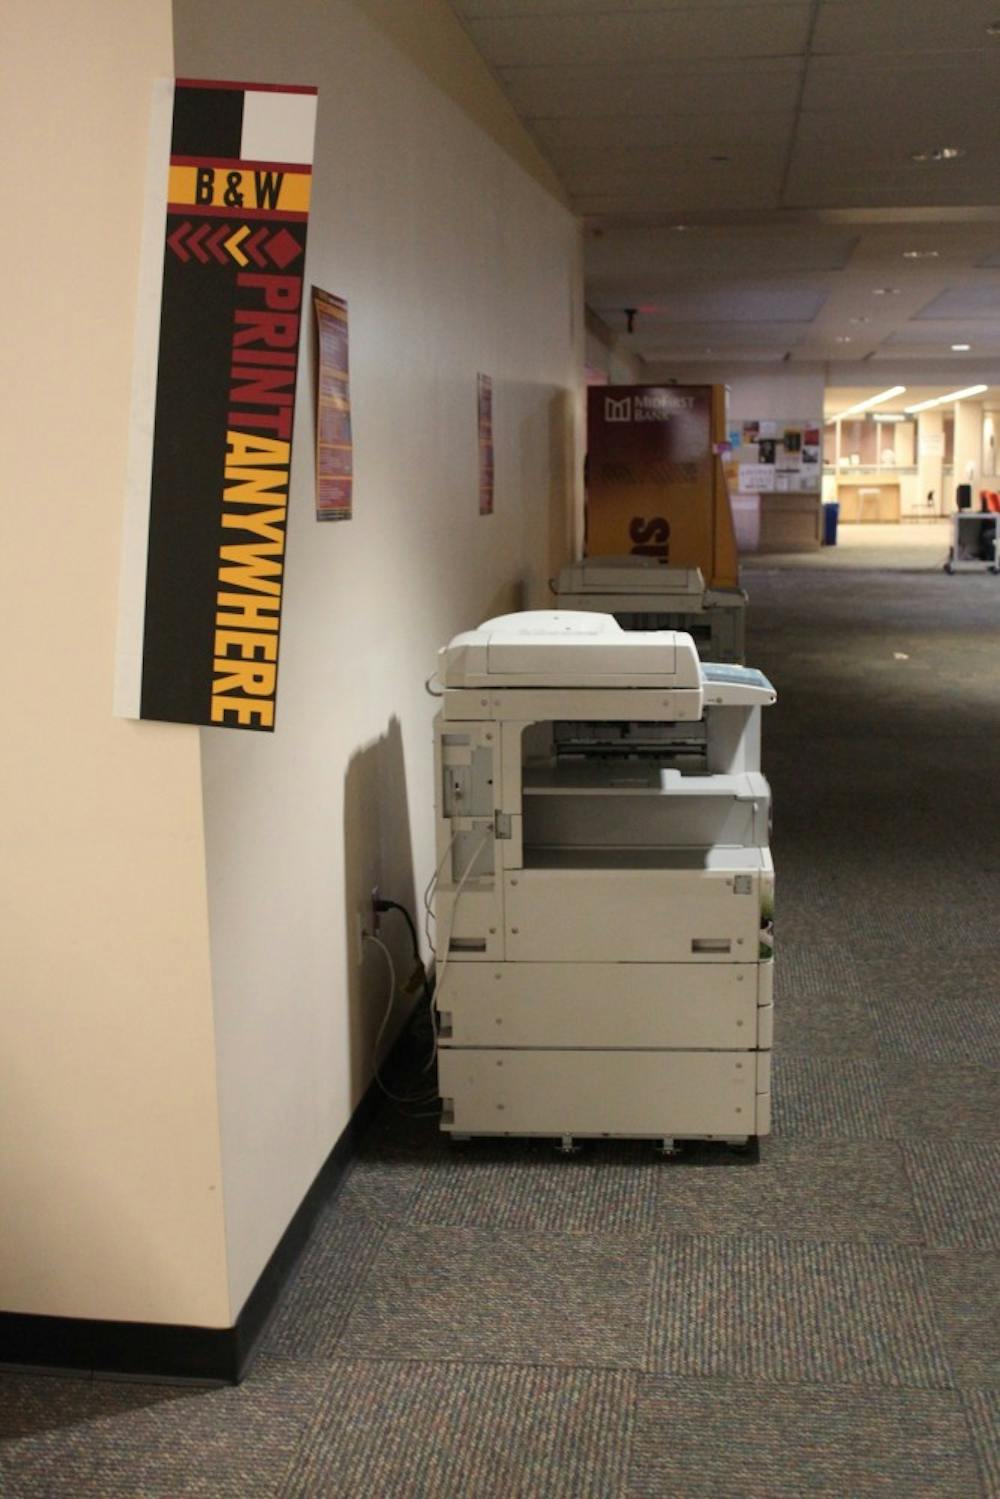 “Print Anywhere” signs are displayed at the Hayden Library in Tempe. Students are now allowed to print before putting money on their student accounts. (Kat Simonovic/The State Press)